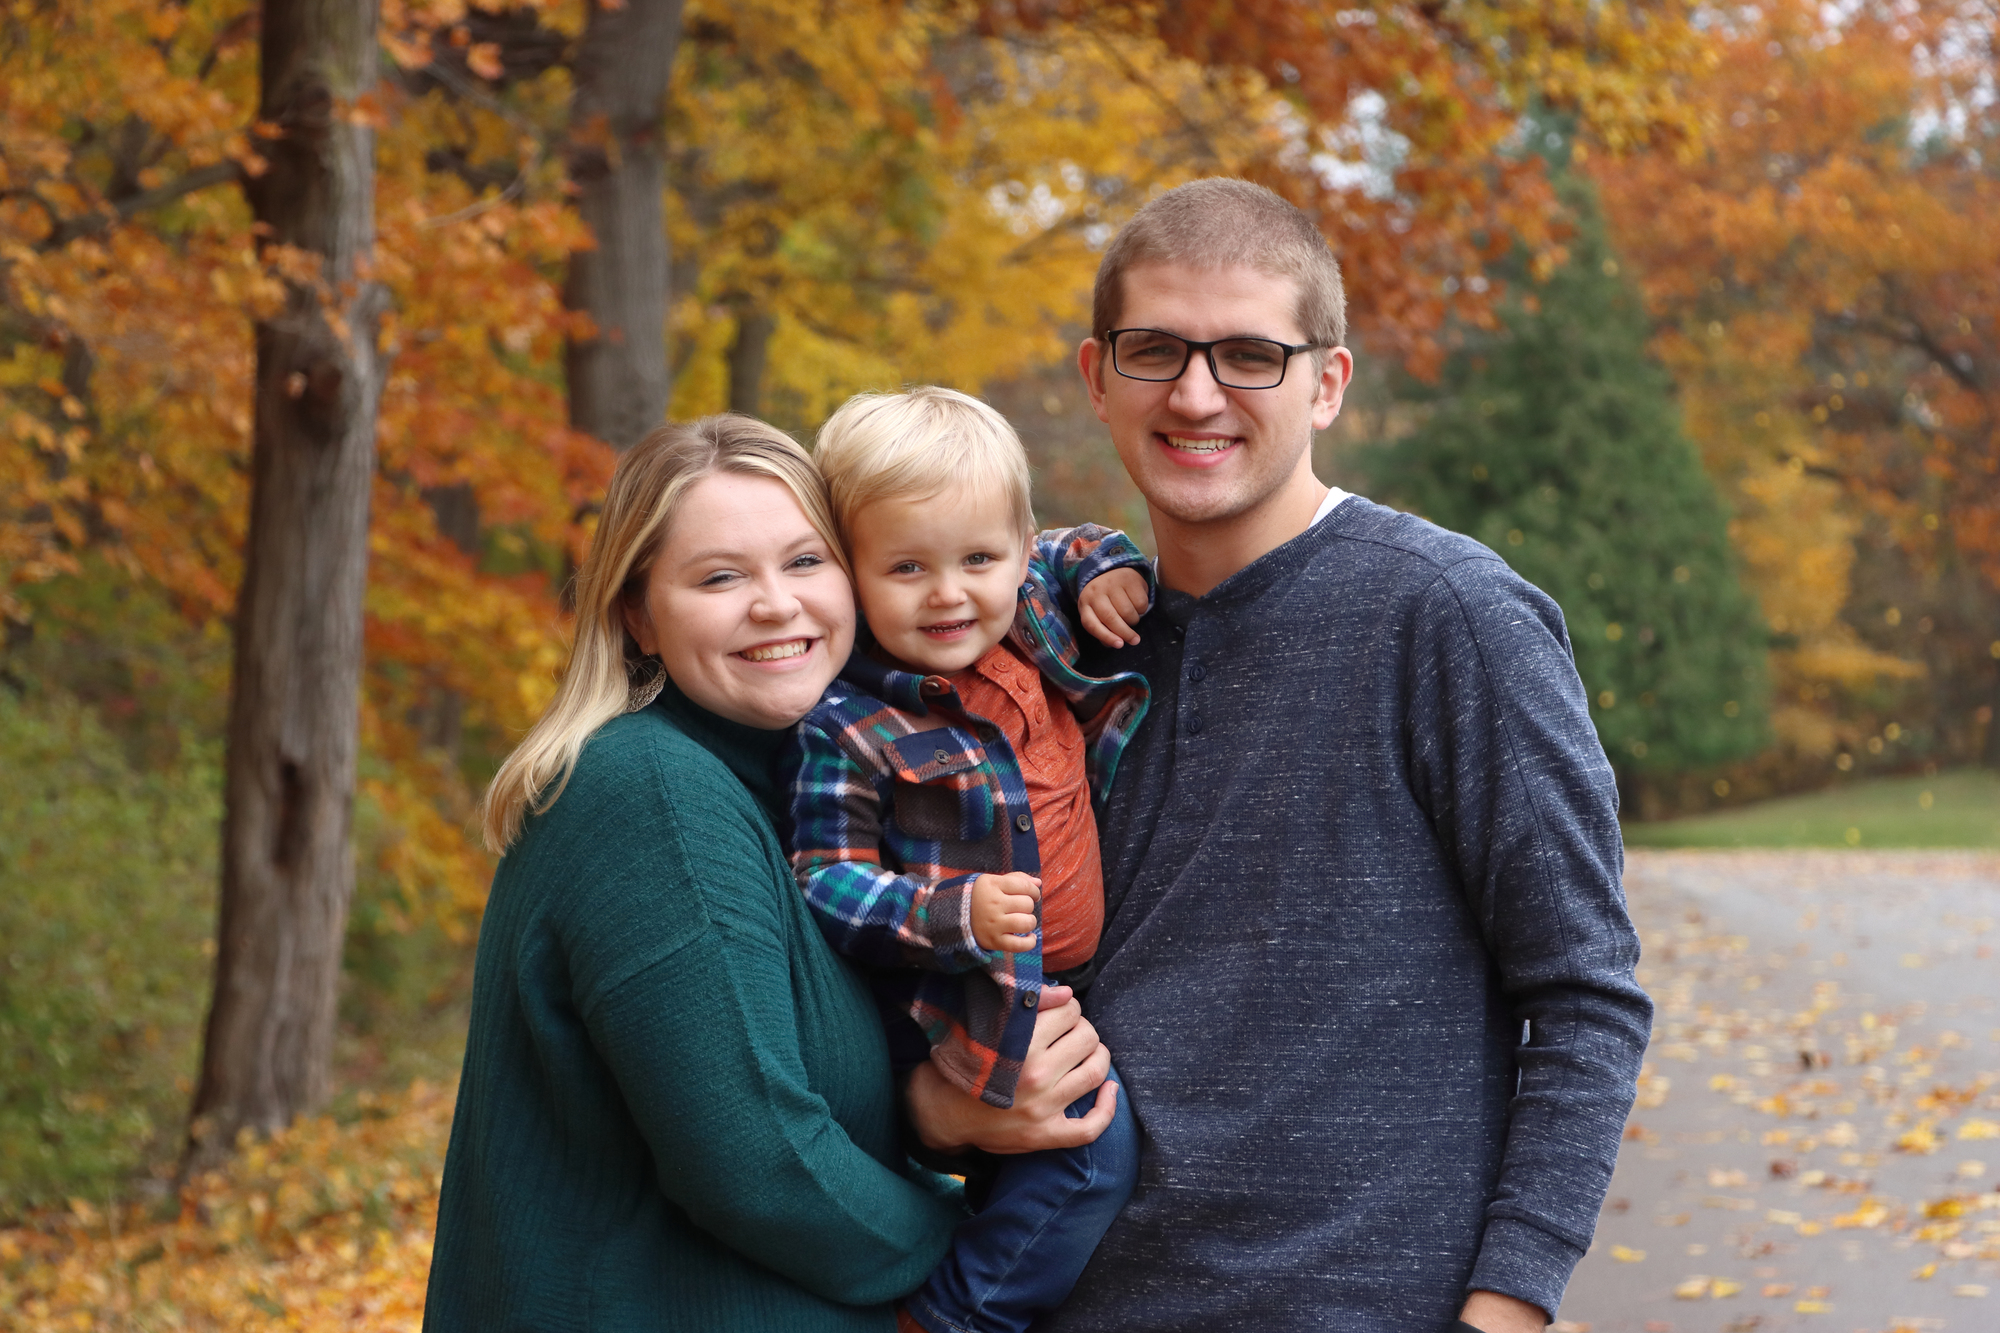 mom, dad and their son at Fitzgerald Park in Grand Ledge on a crisp fall day.